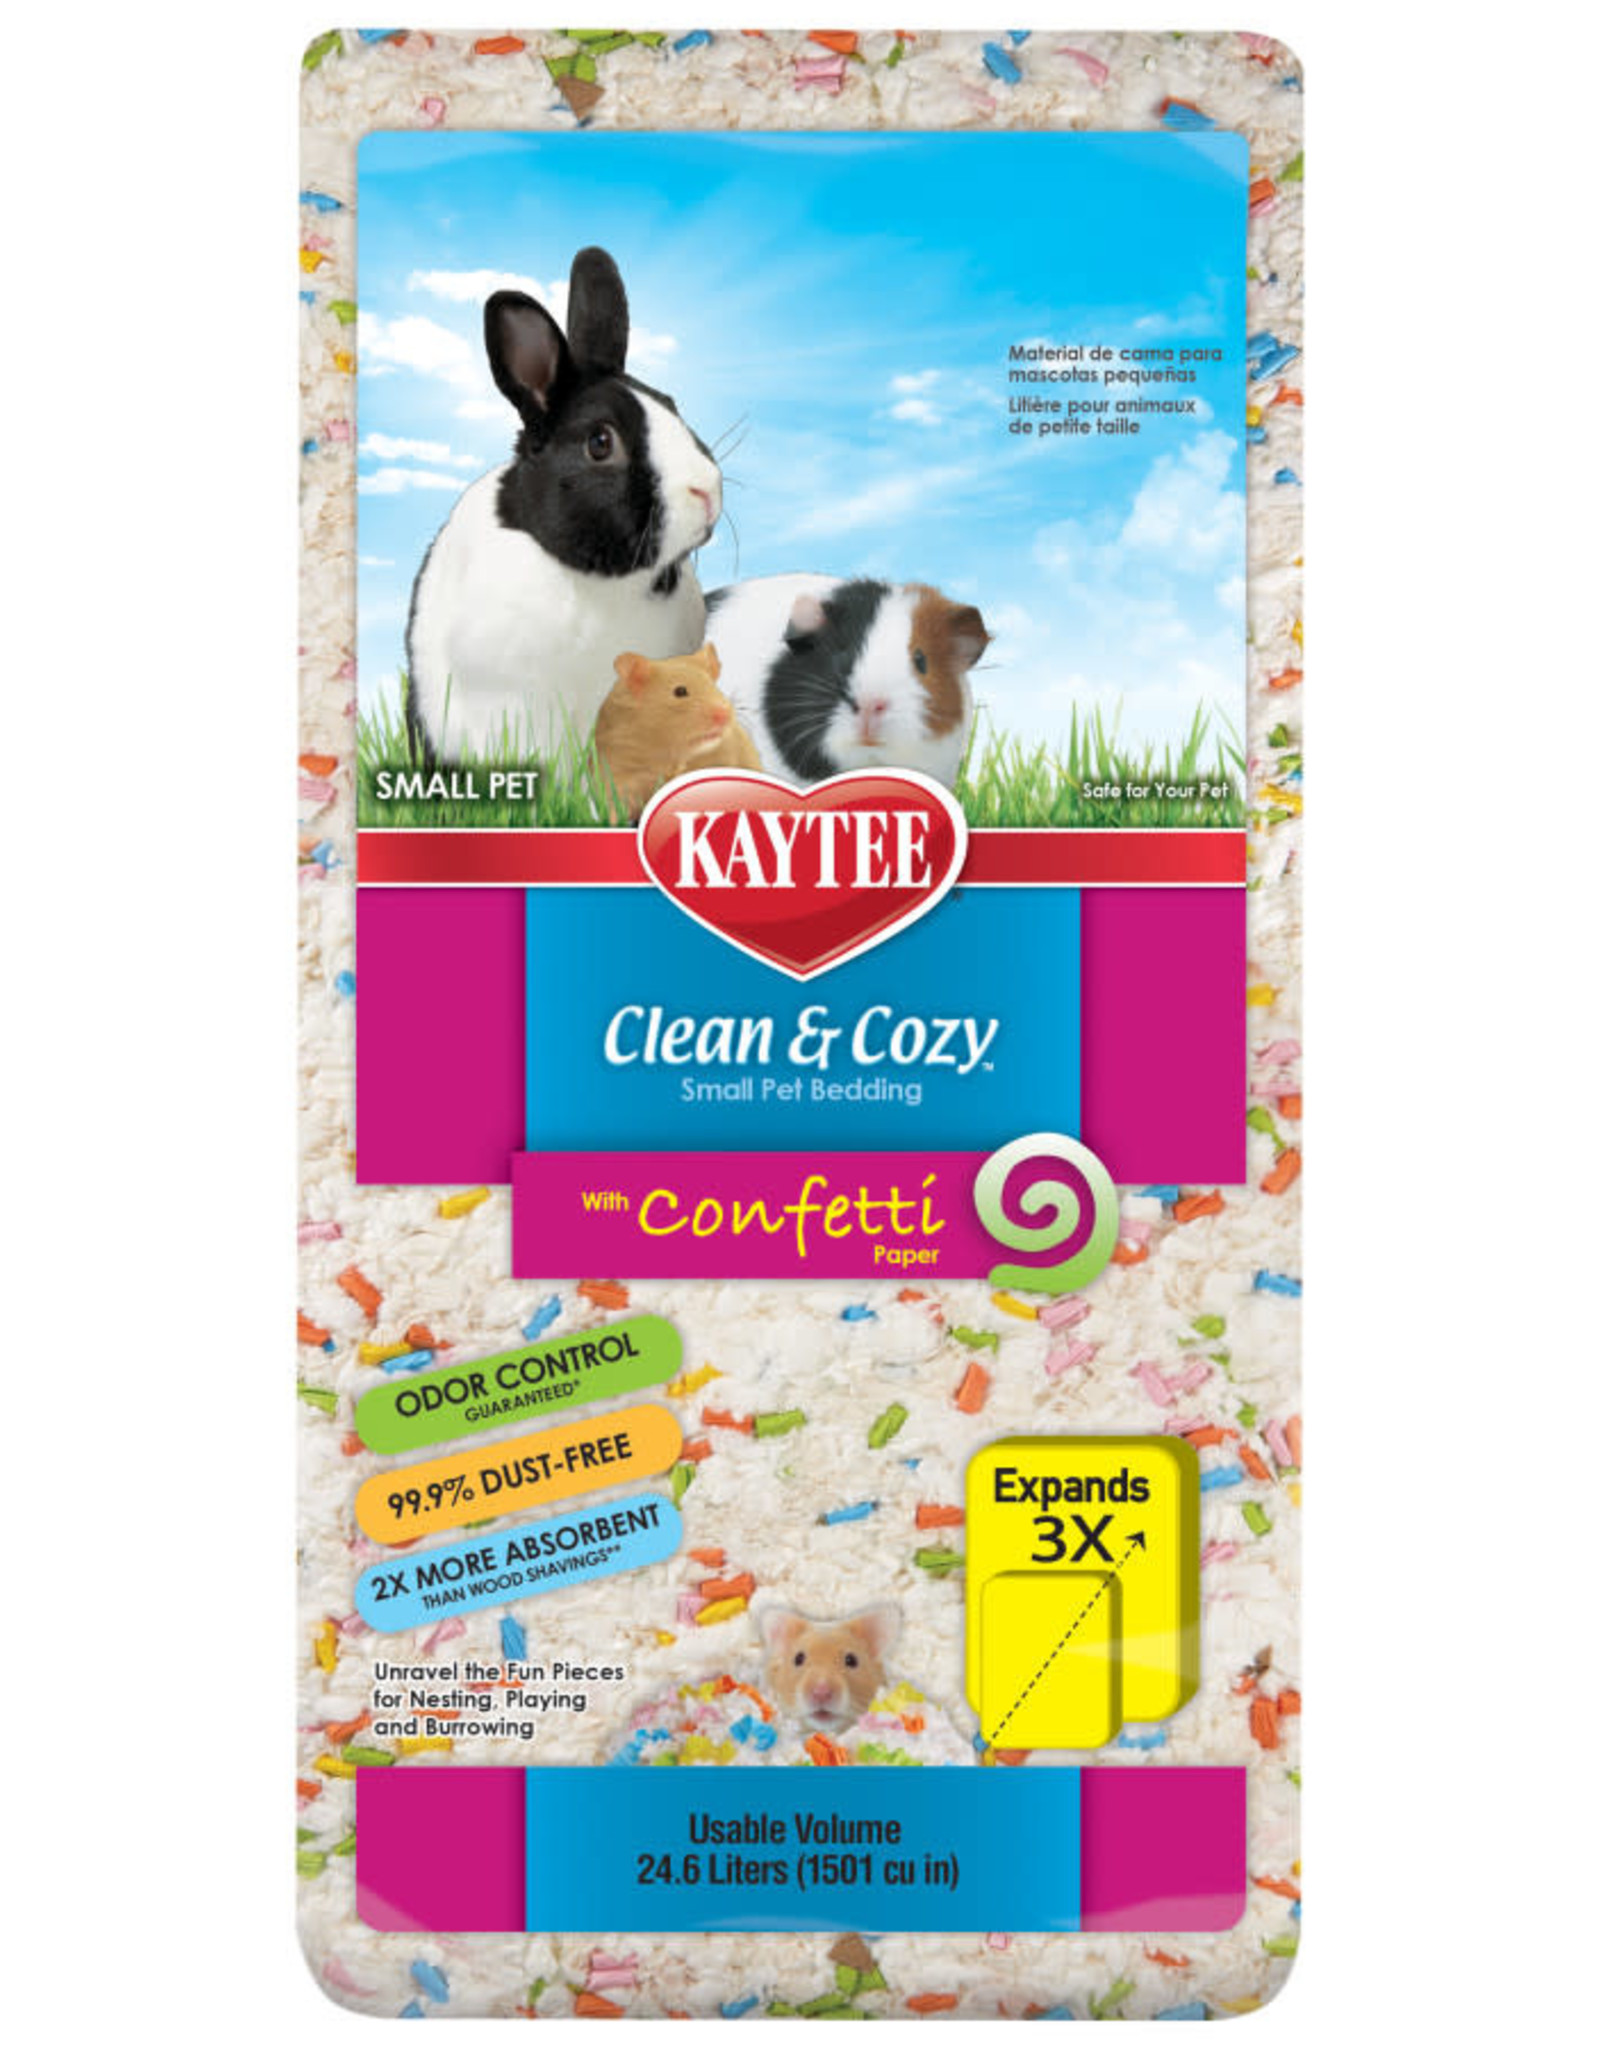 CENTRAL - KAYTEE PRODUCTS KAYTEE BEDDING- CLEAN AND COZY- CONFETTI- 24.6L